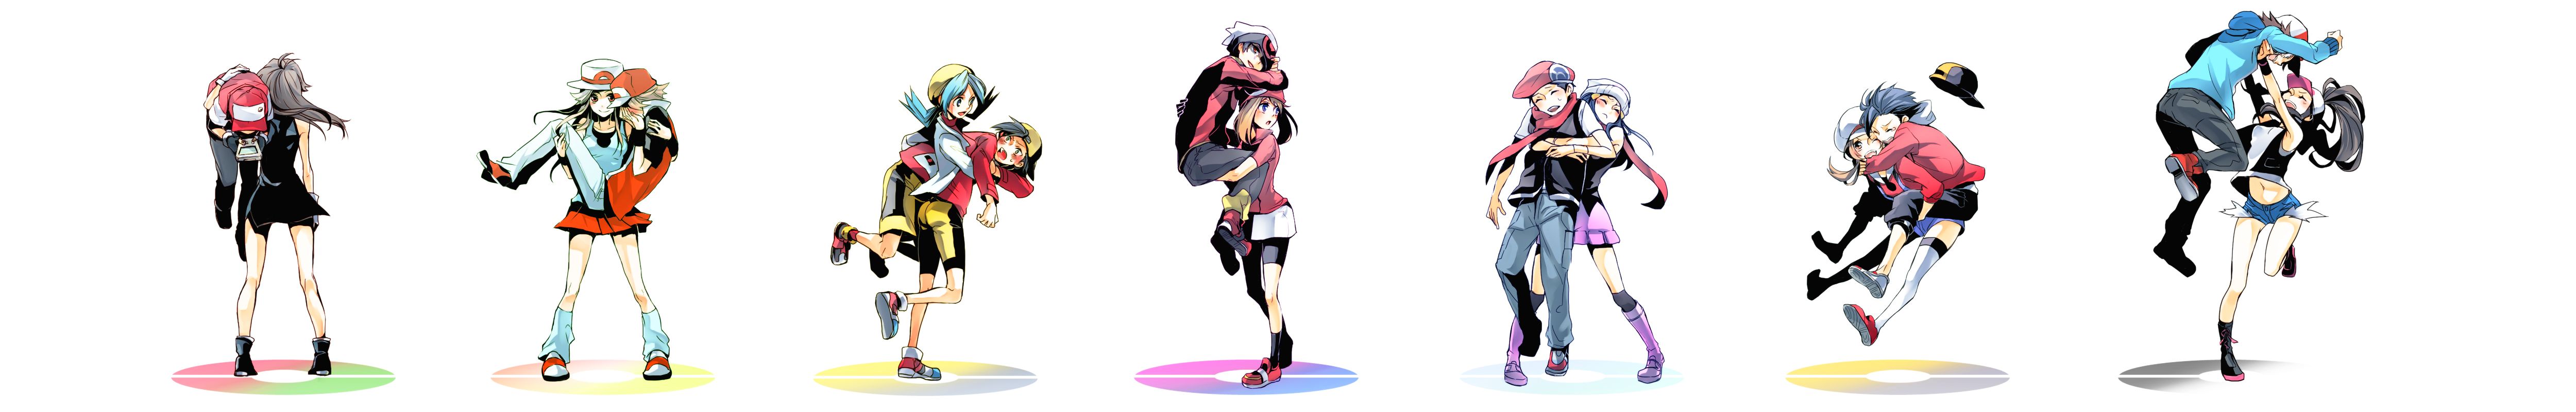 Pokemon Trainers Wallpaper And Background Id